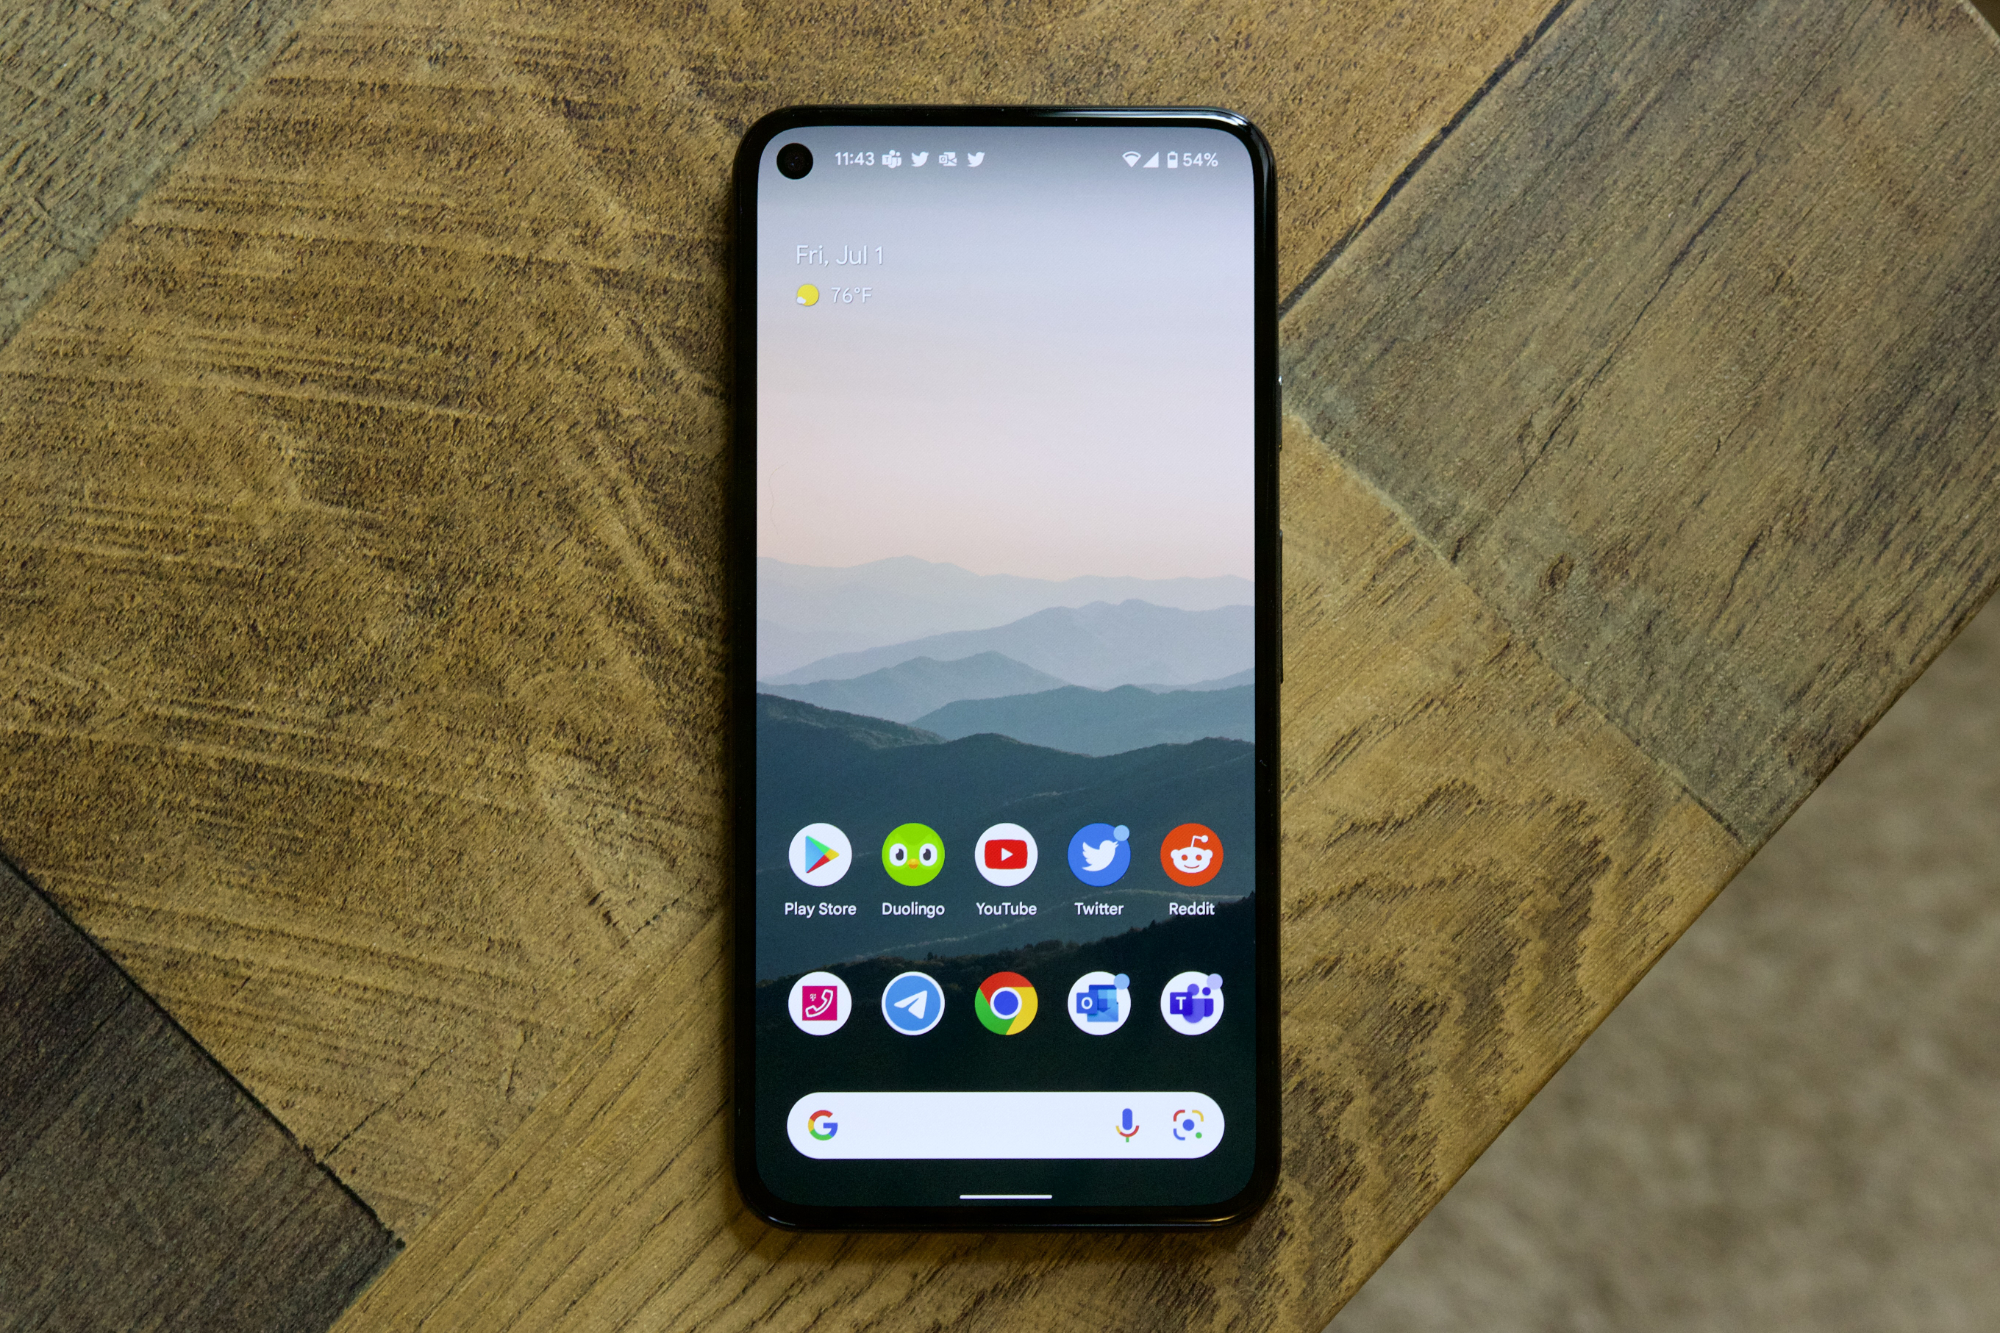 Google Pixel 5 Review: Brilliant but outshined - PhoneArena